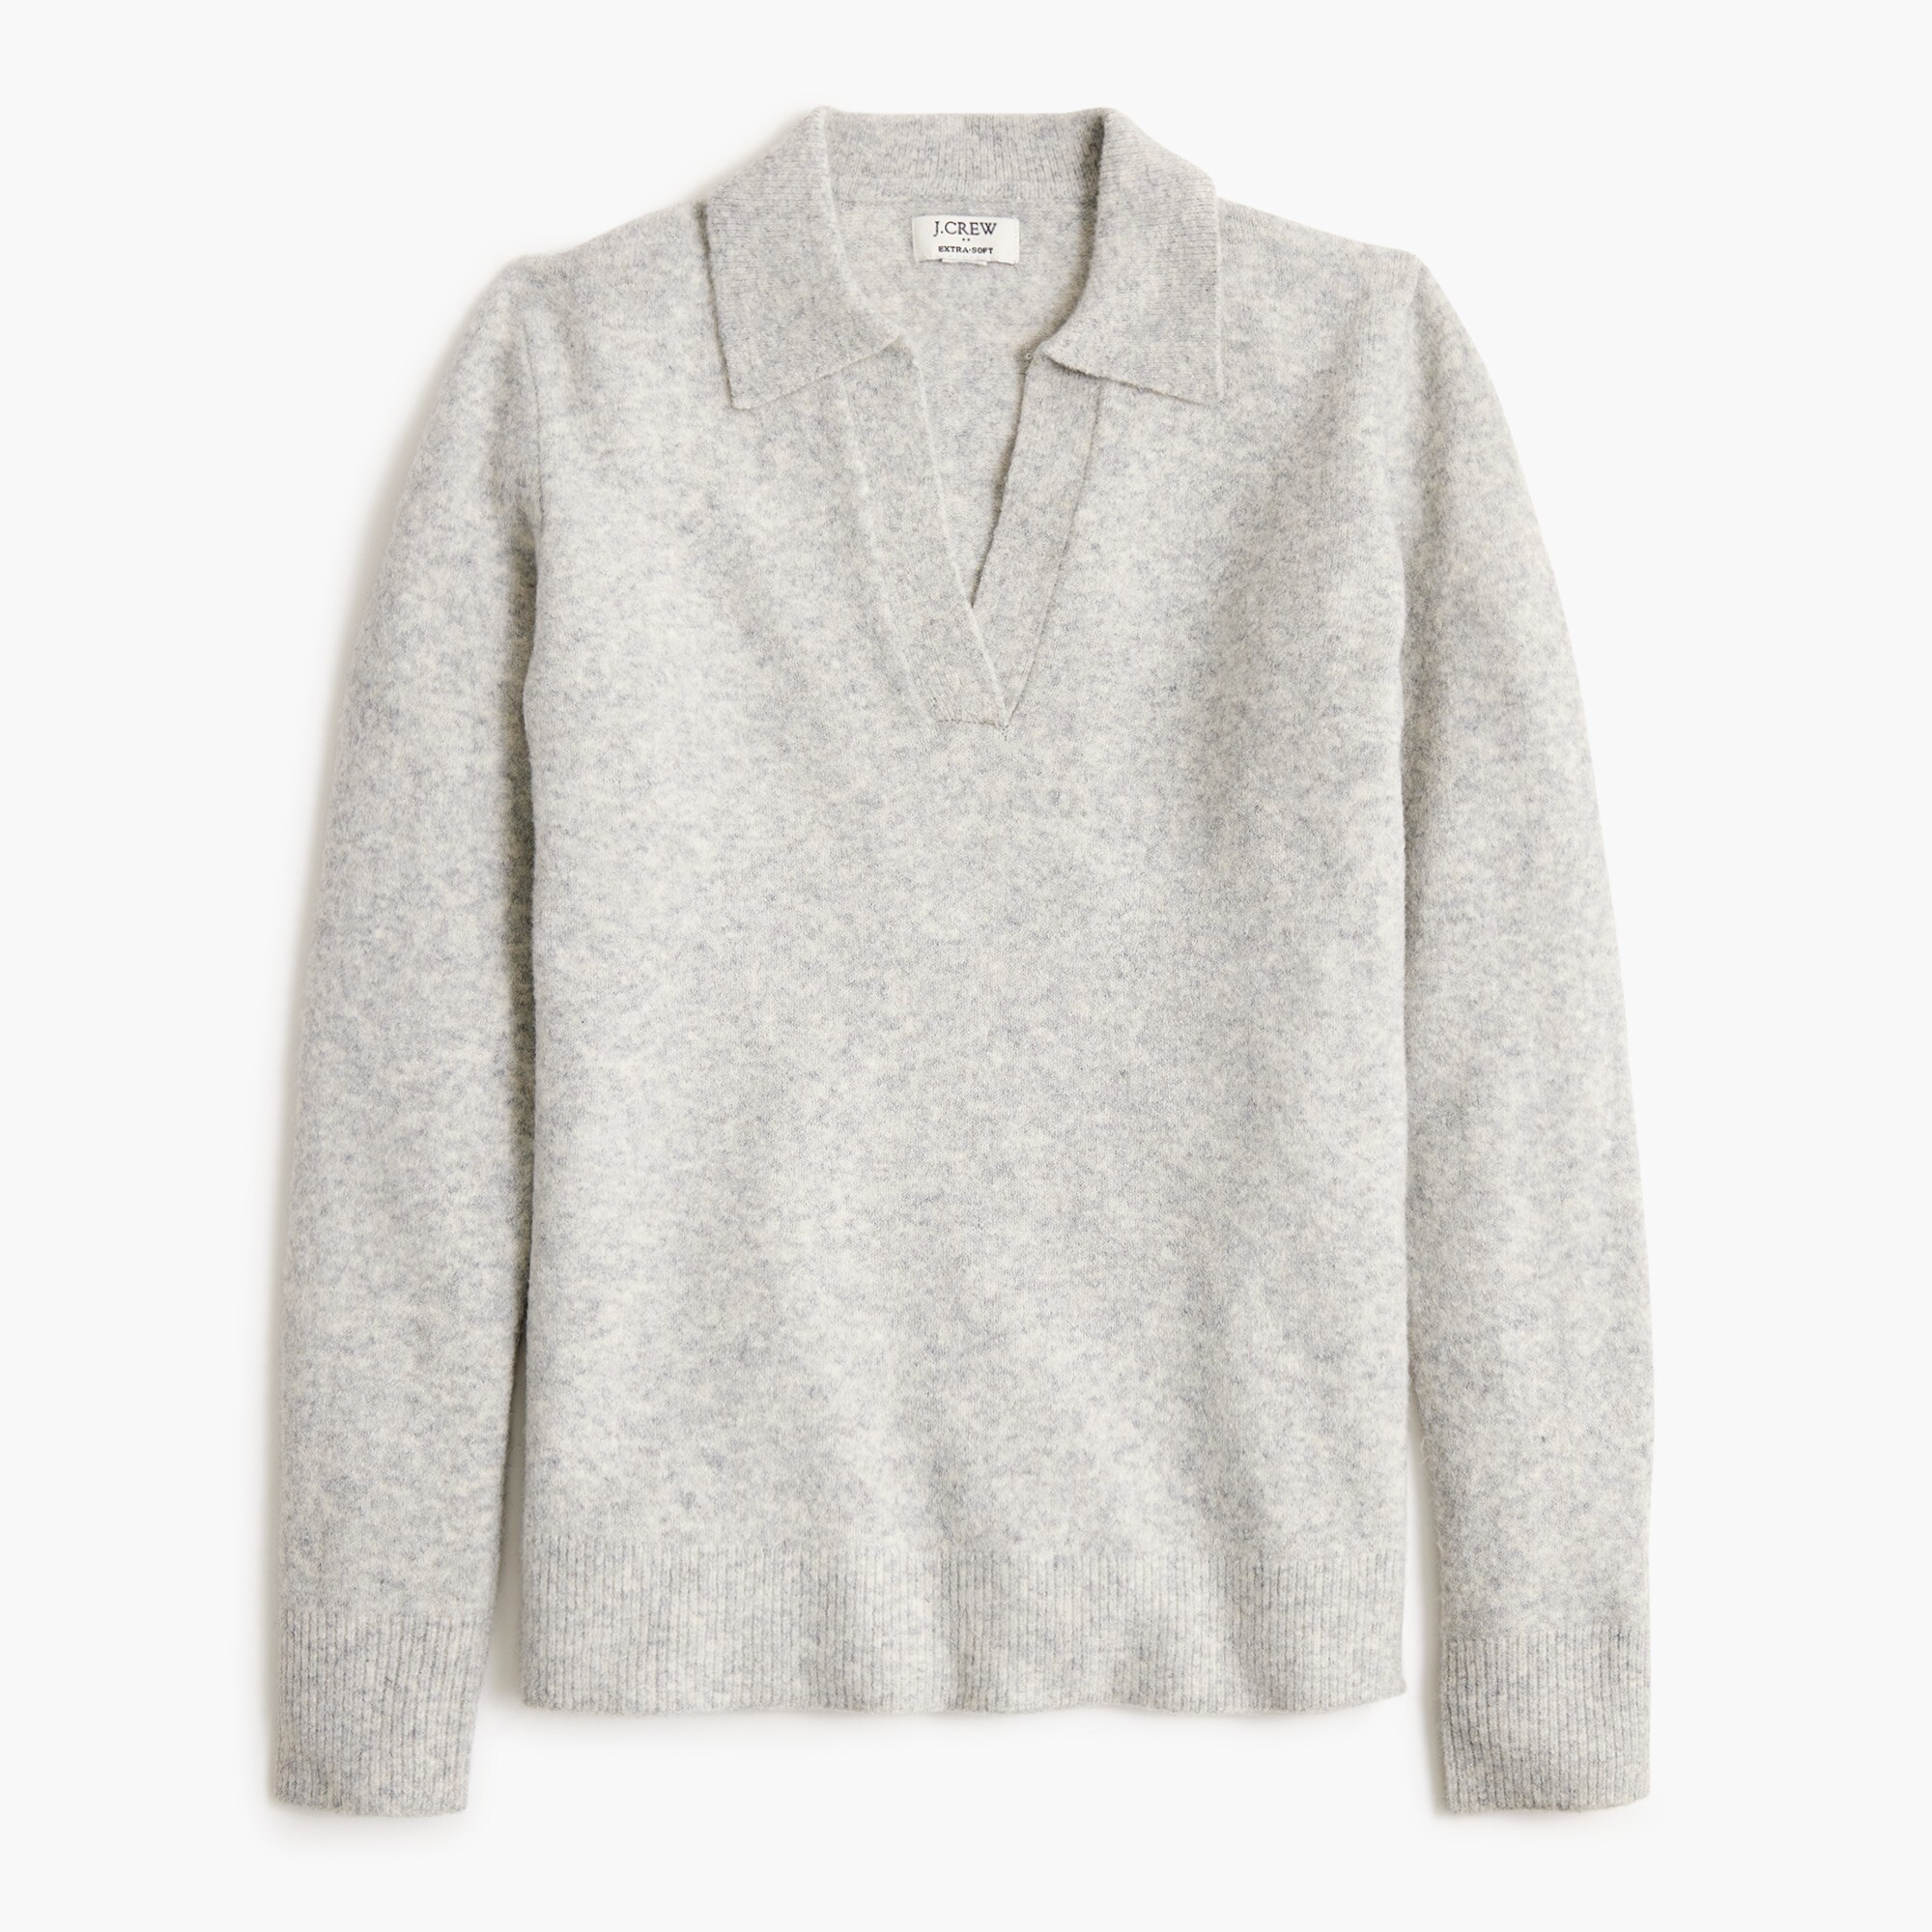  Sweater-polo in extra-soft yarn